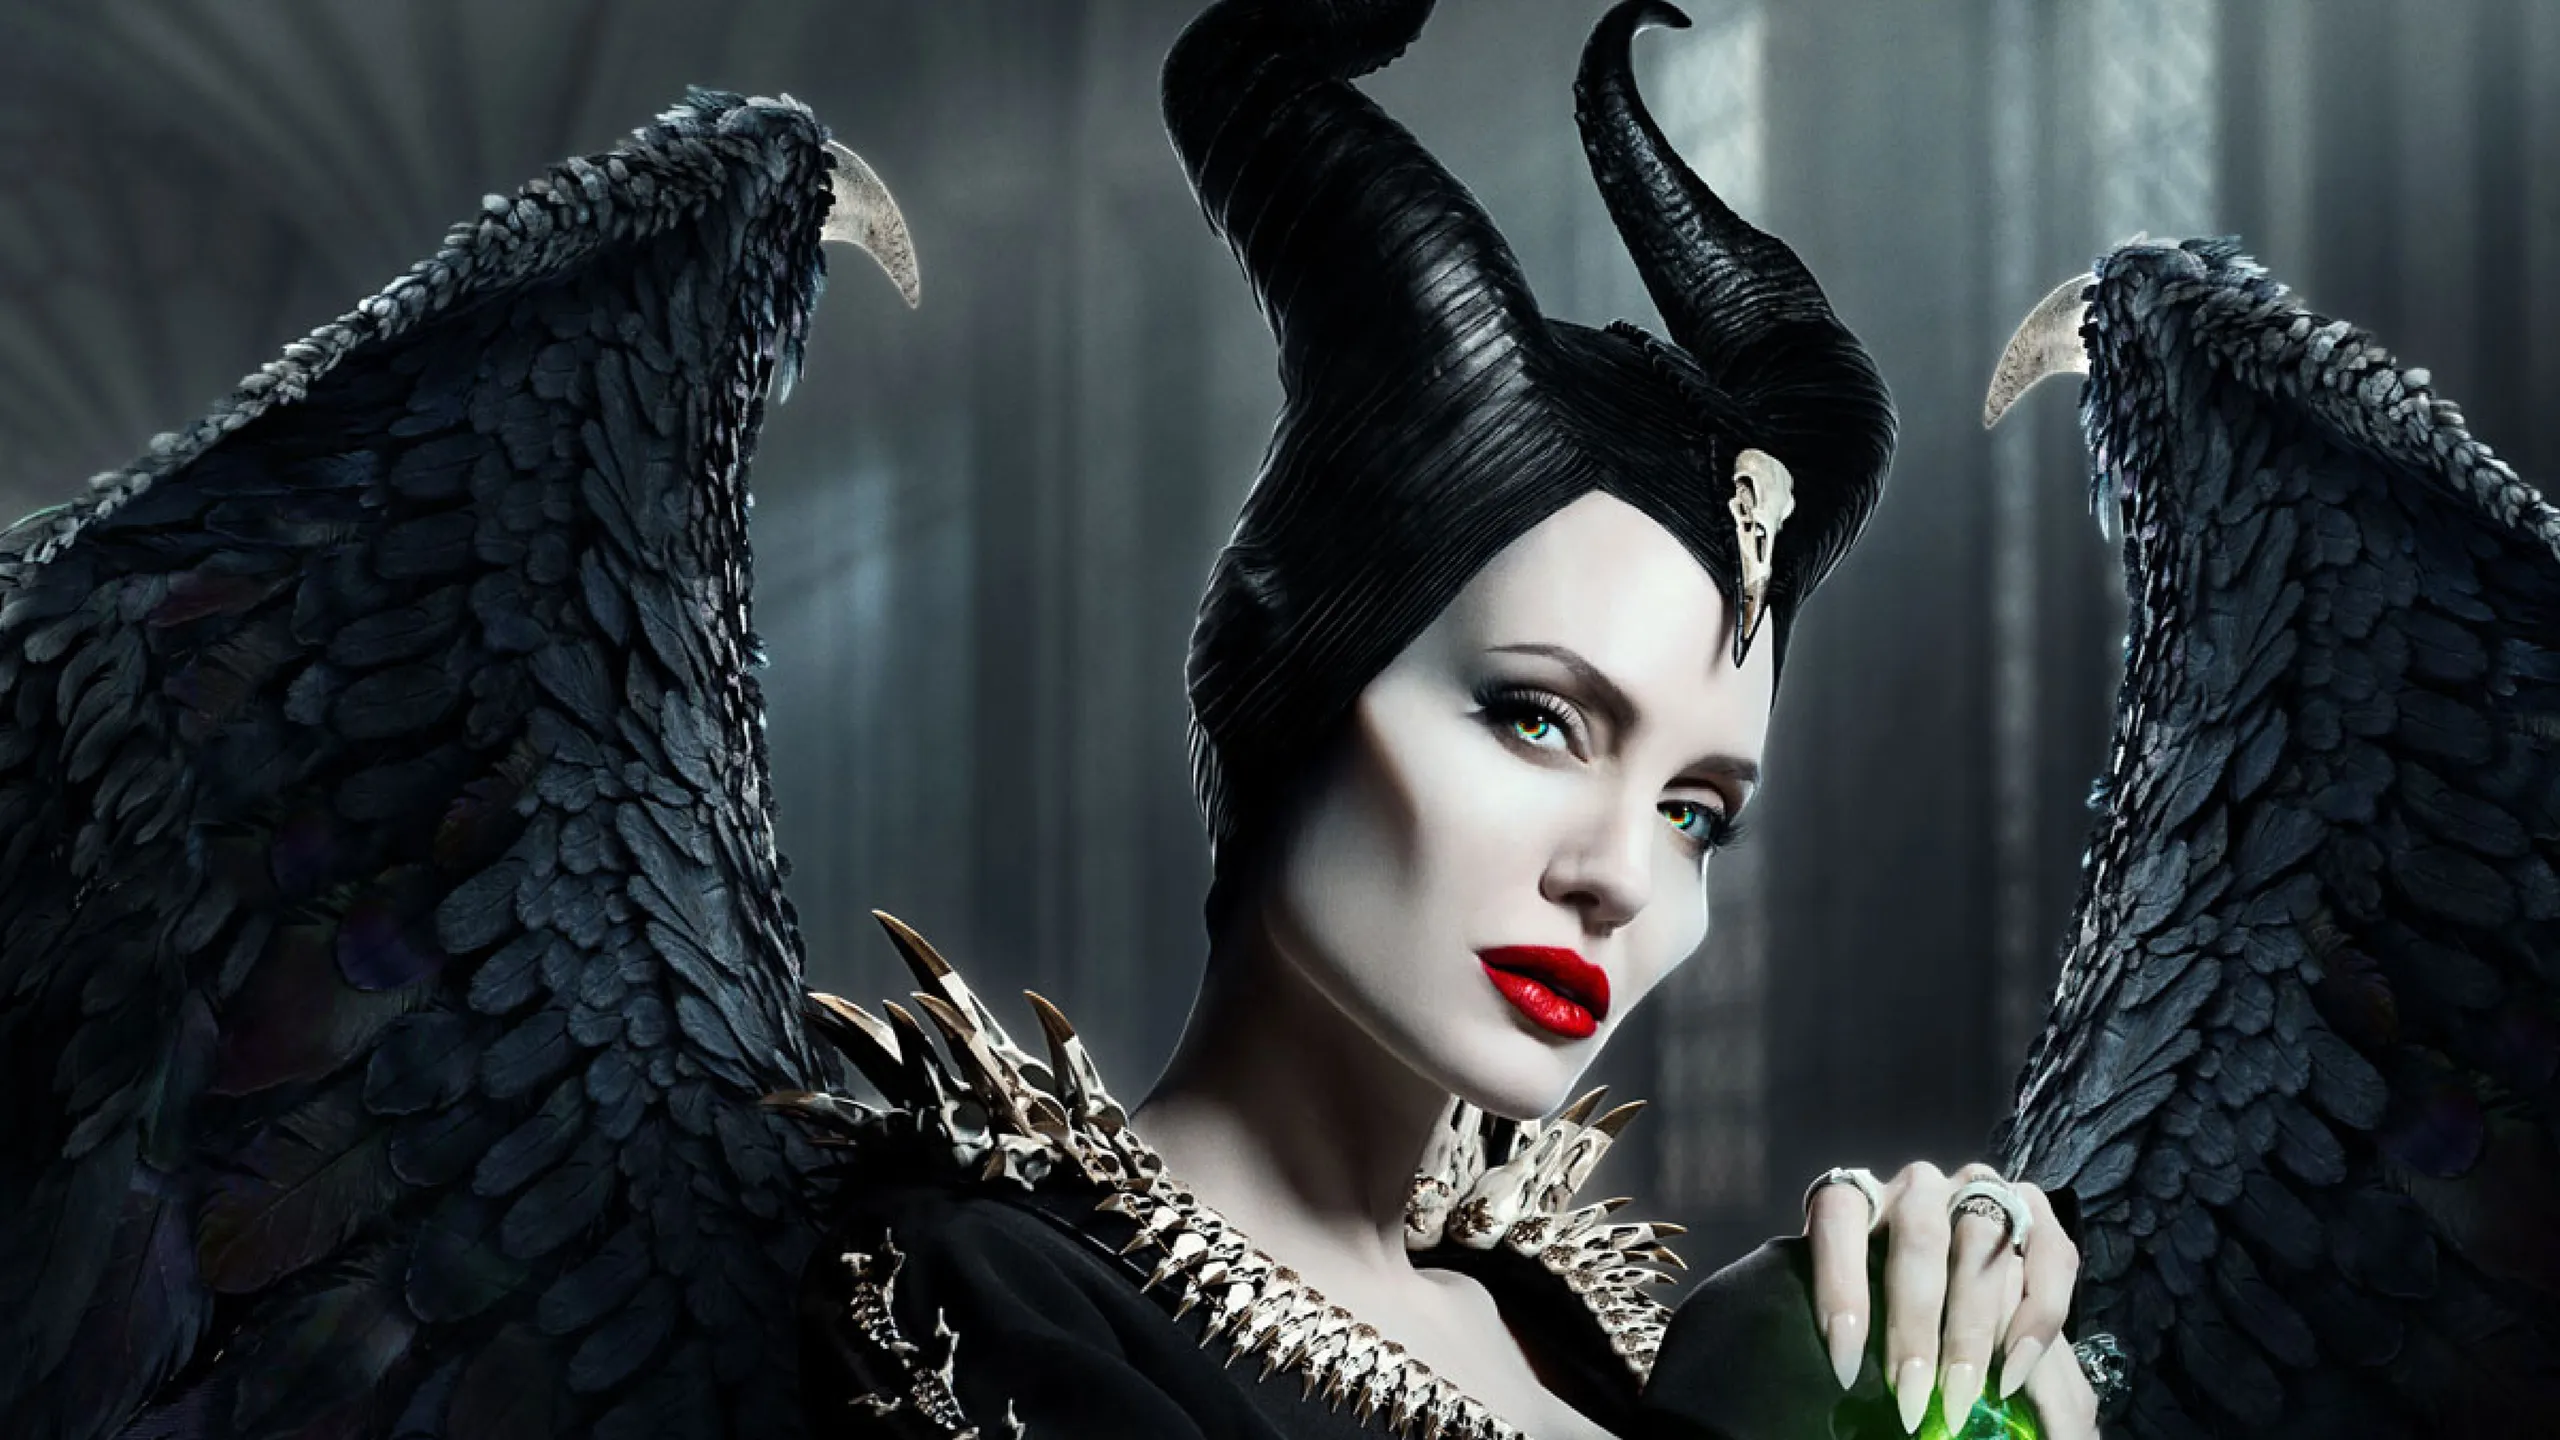 Maleficent 3' in The Works at Disney - Daily Disney News